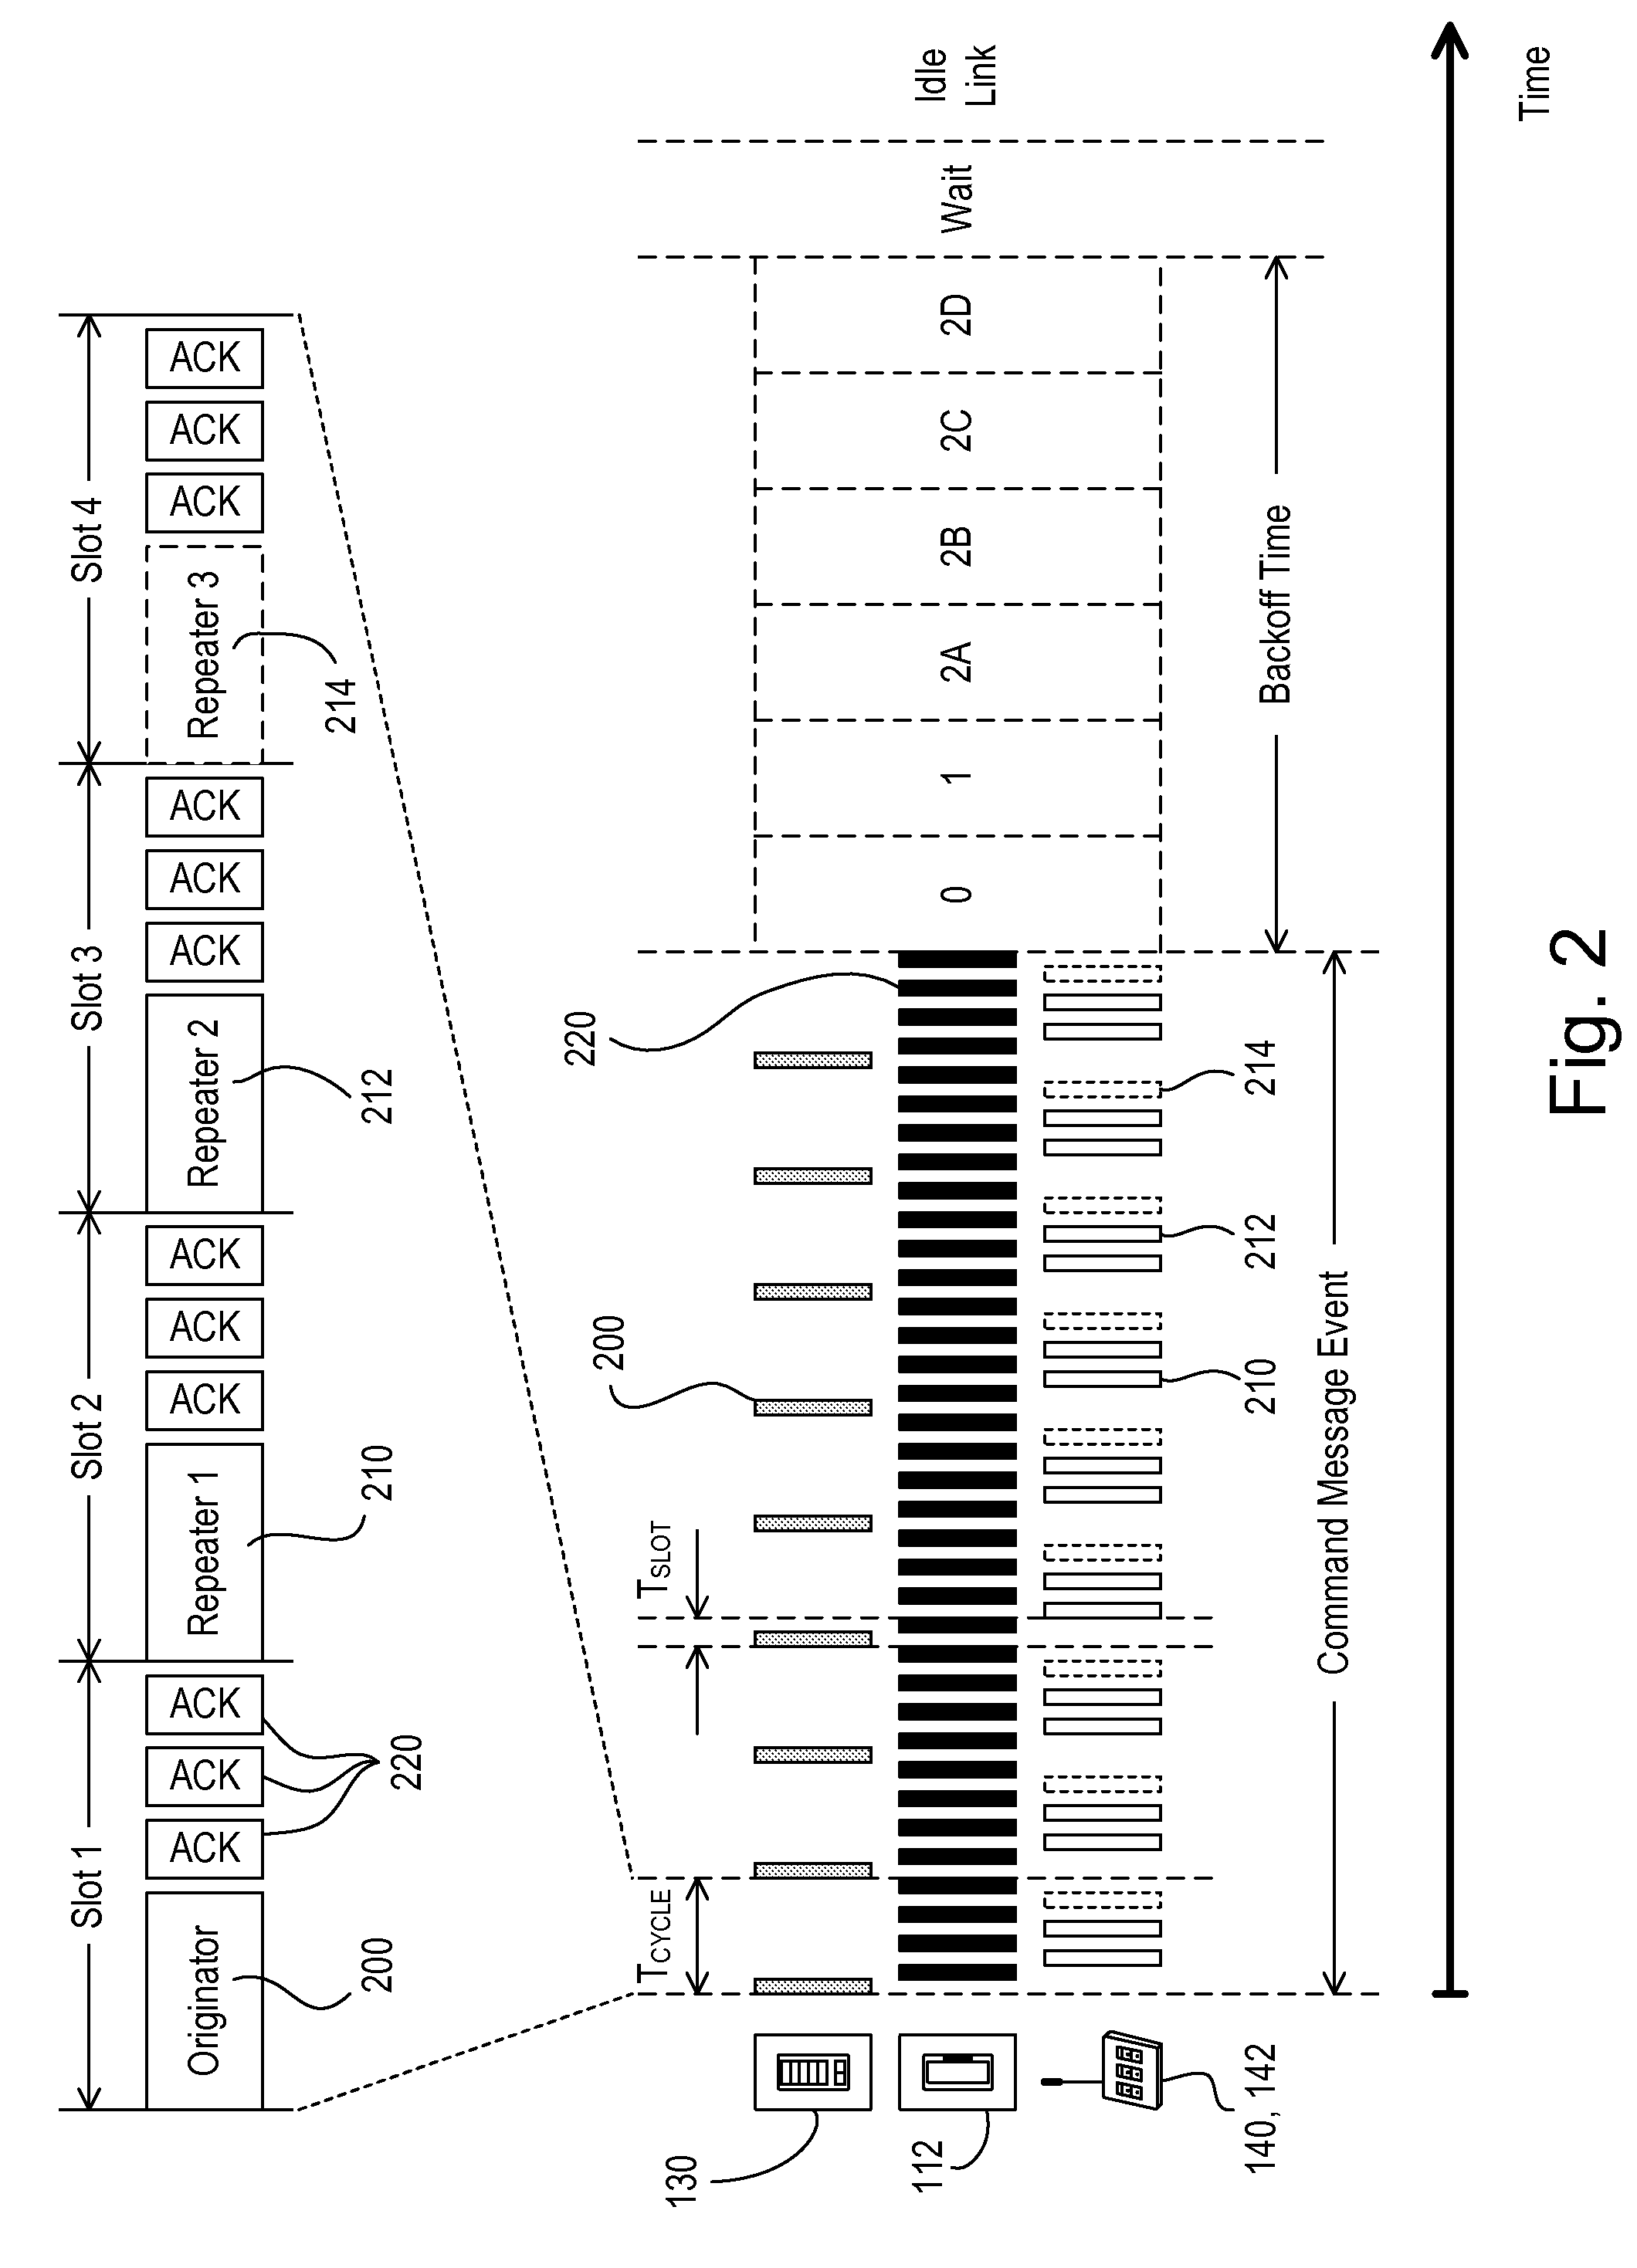 Communication System for a Radio-Frequency Load Control System